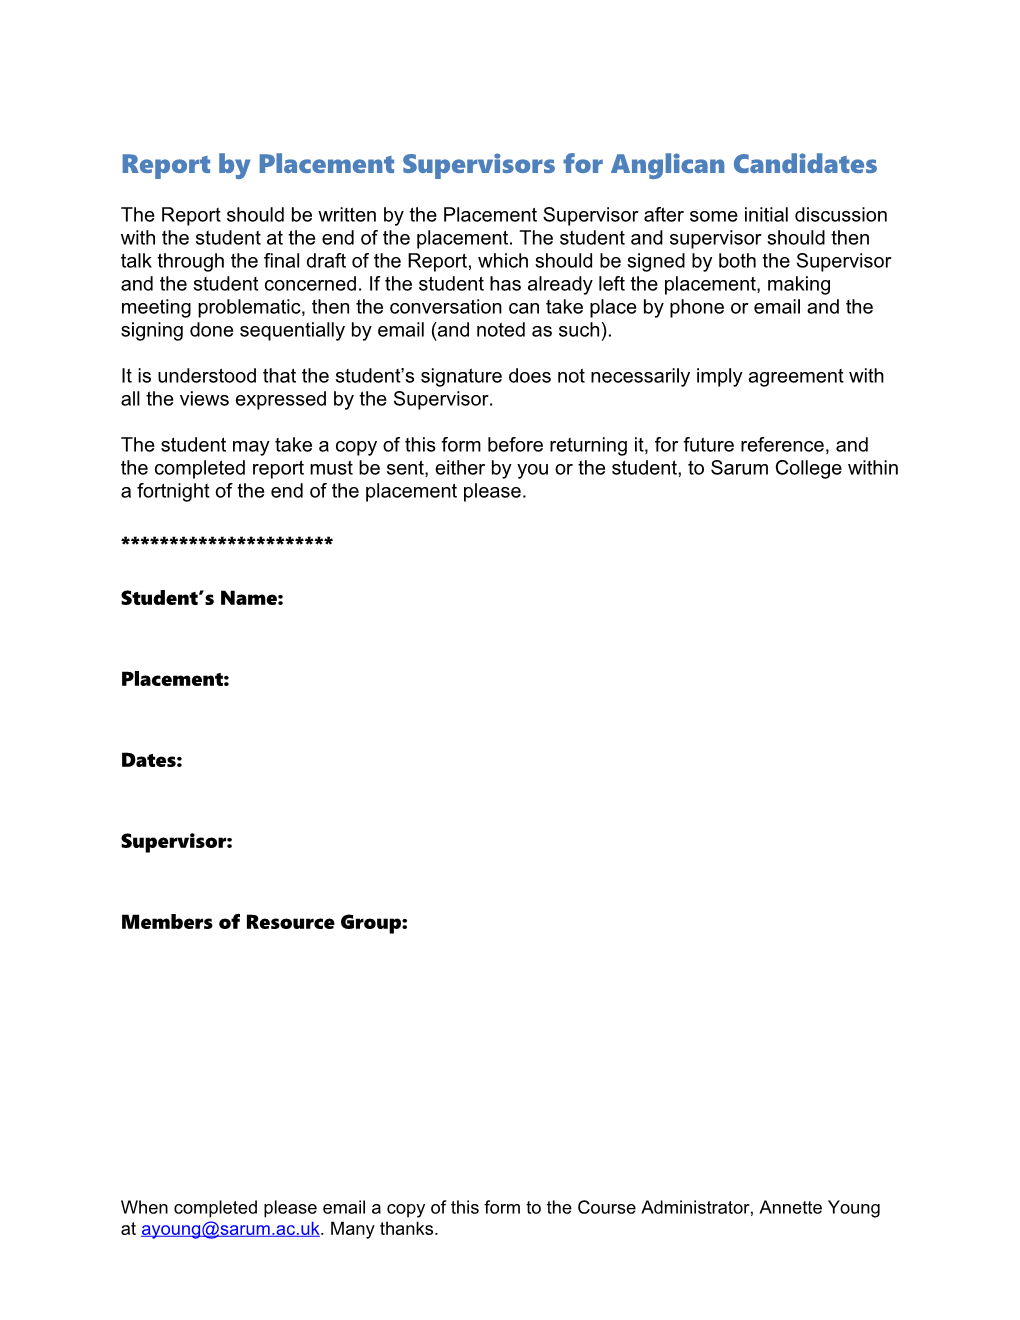 Report by Placement Supervisors for Anglican Candidates